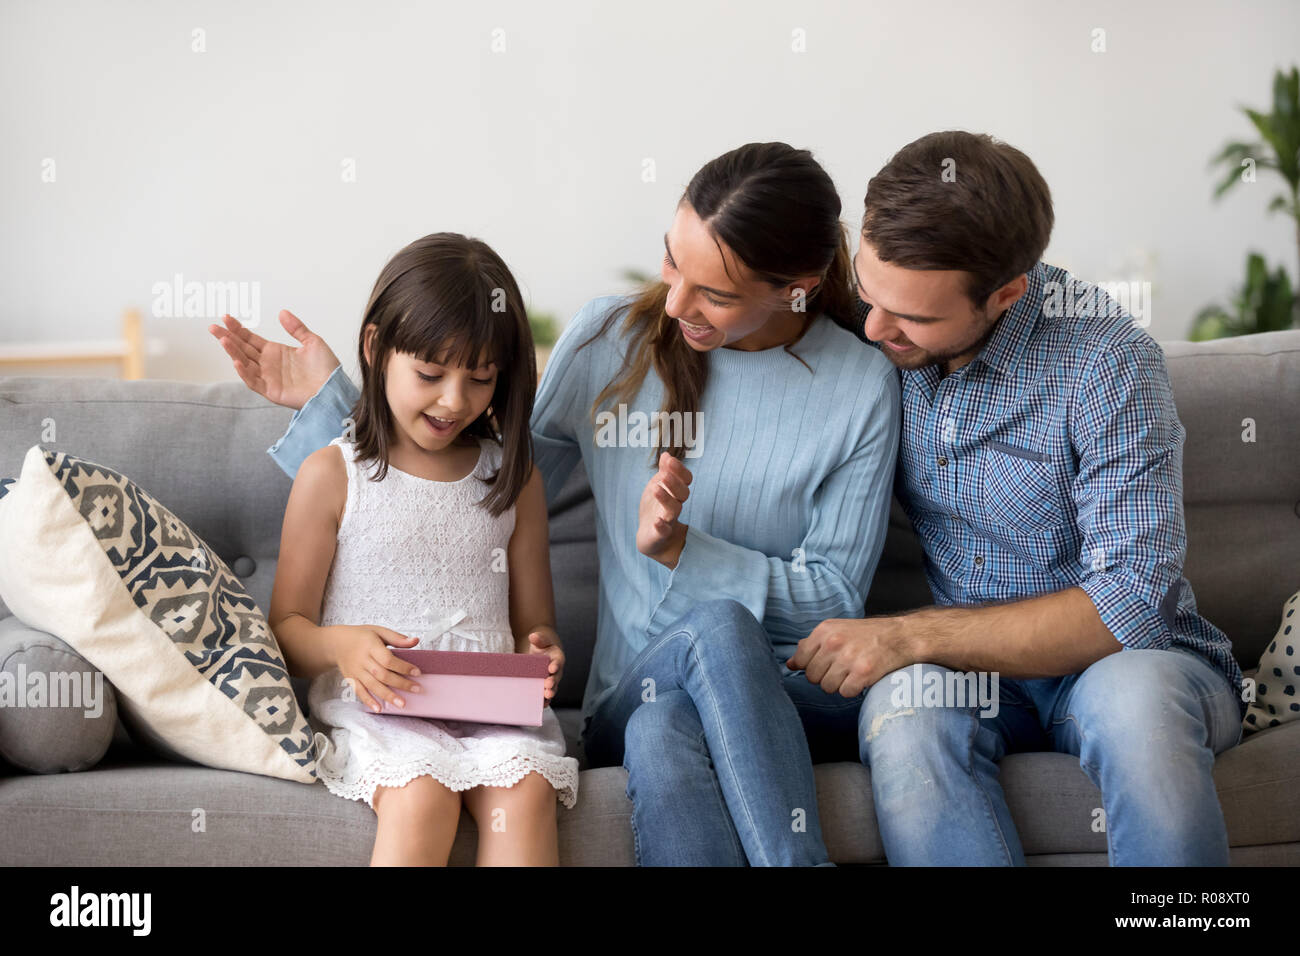 Parents congratulate loving daughter sitting together on couch Stock Photo